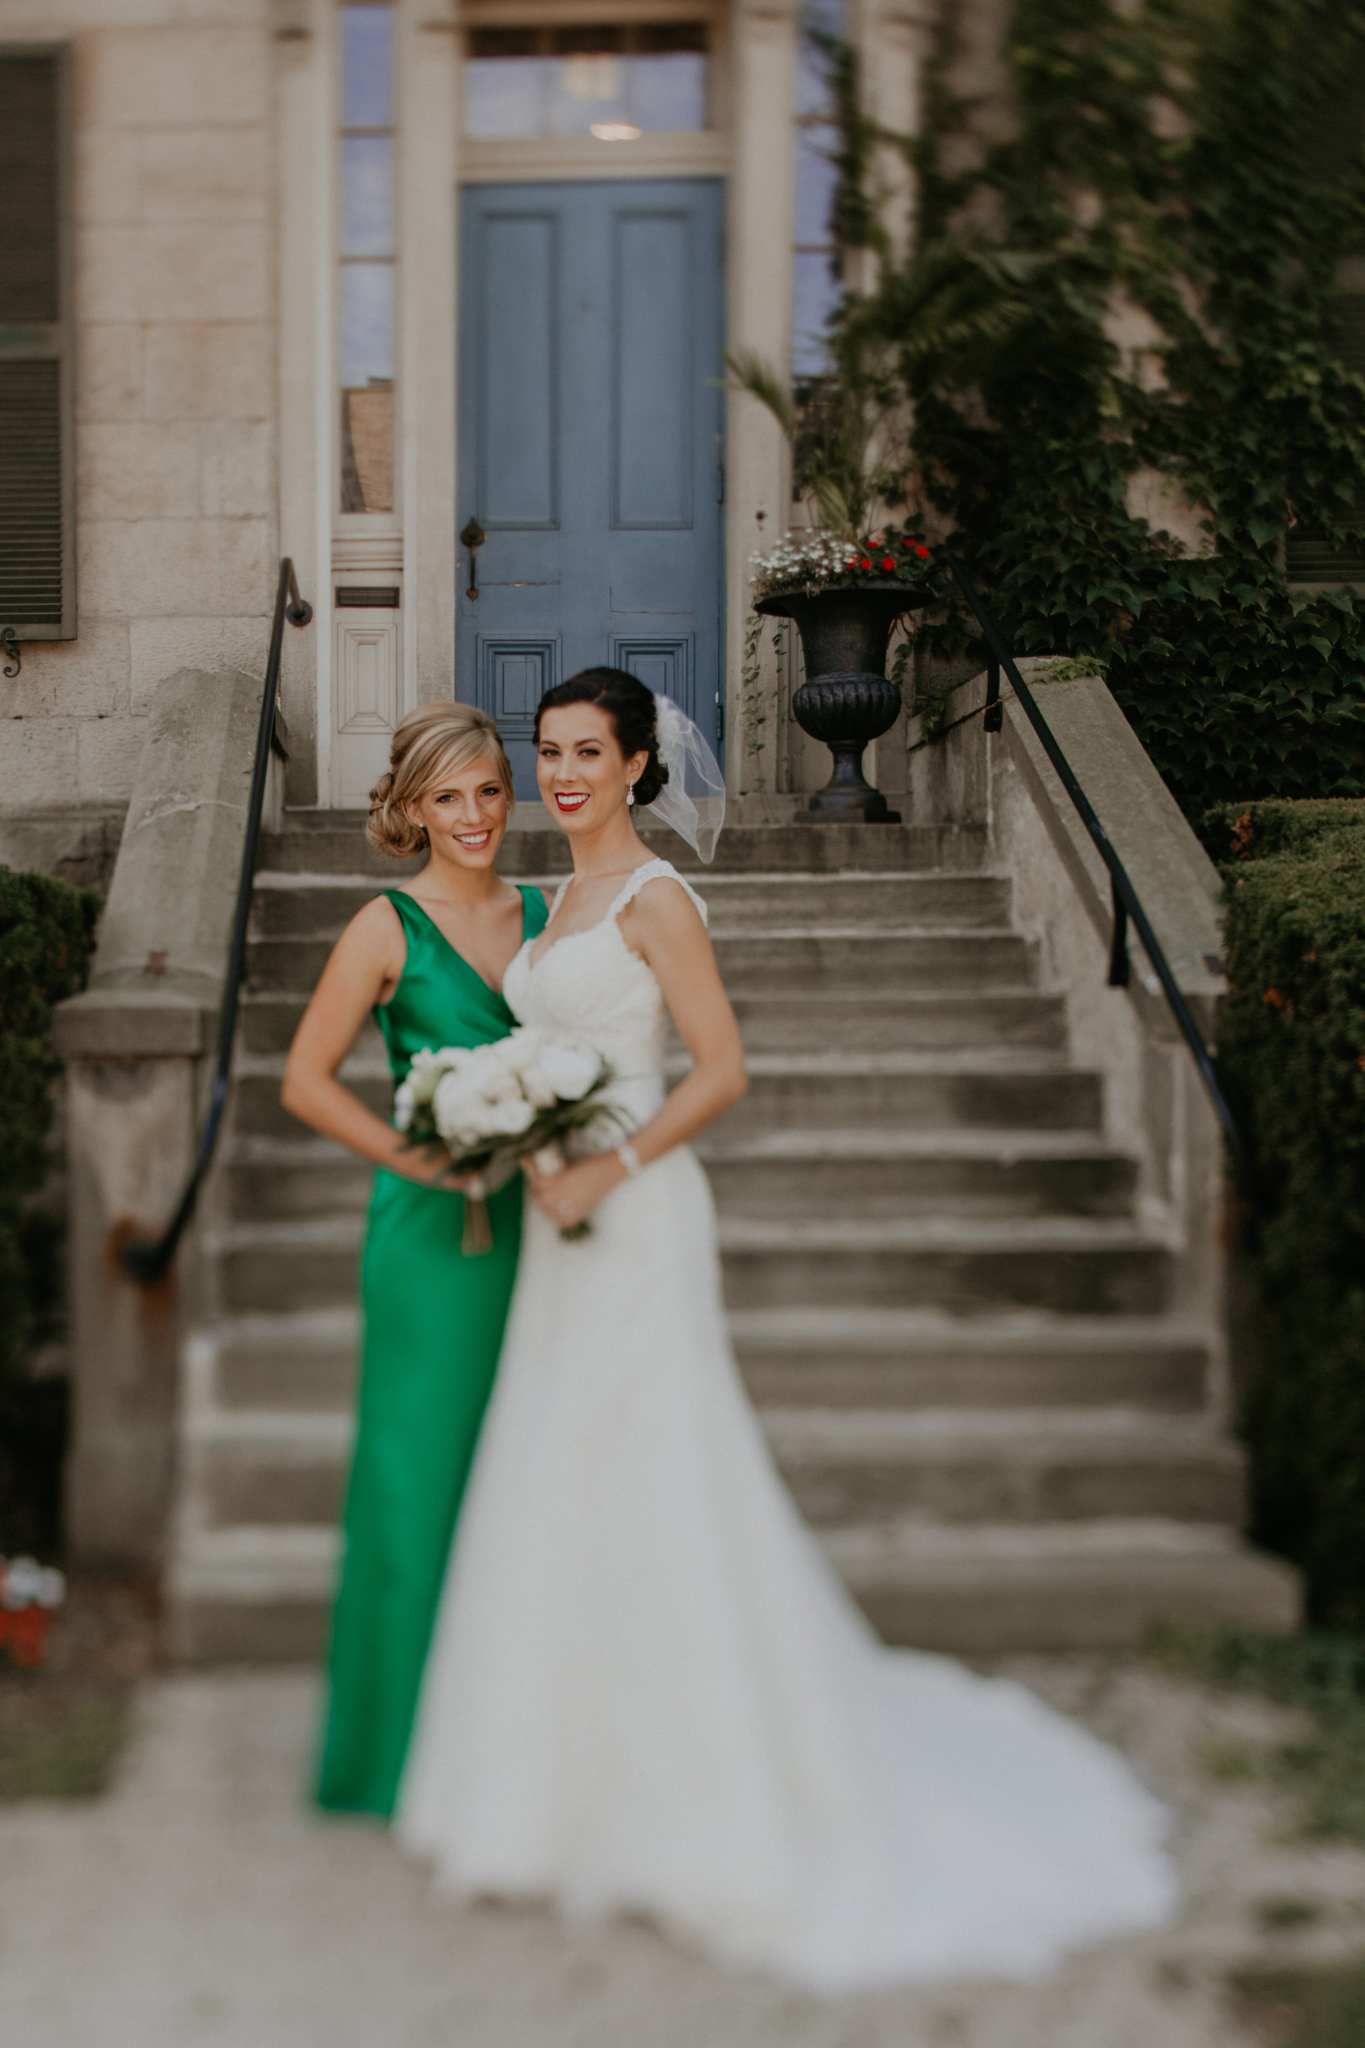 Portrait of bride and bridesmaid on wedding day